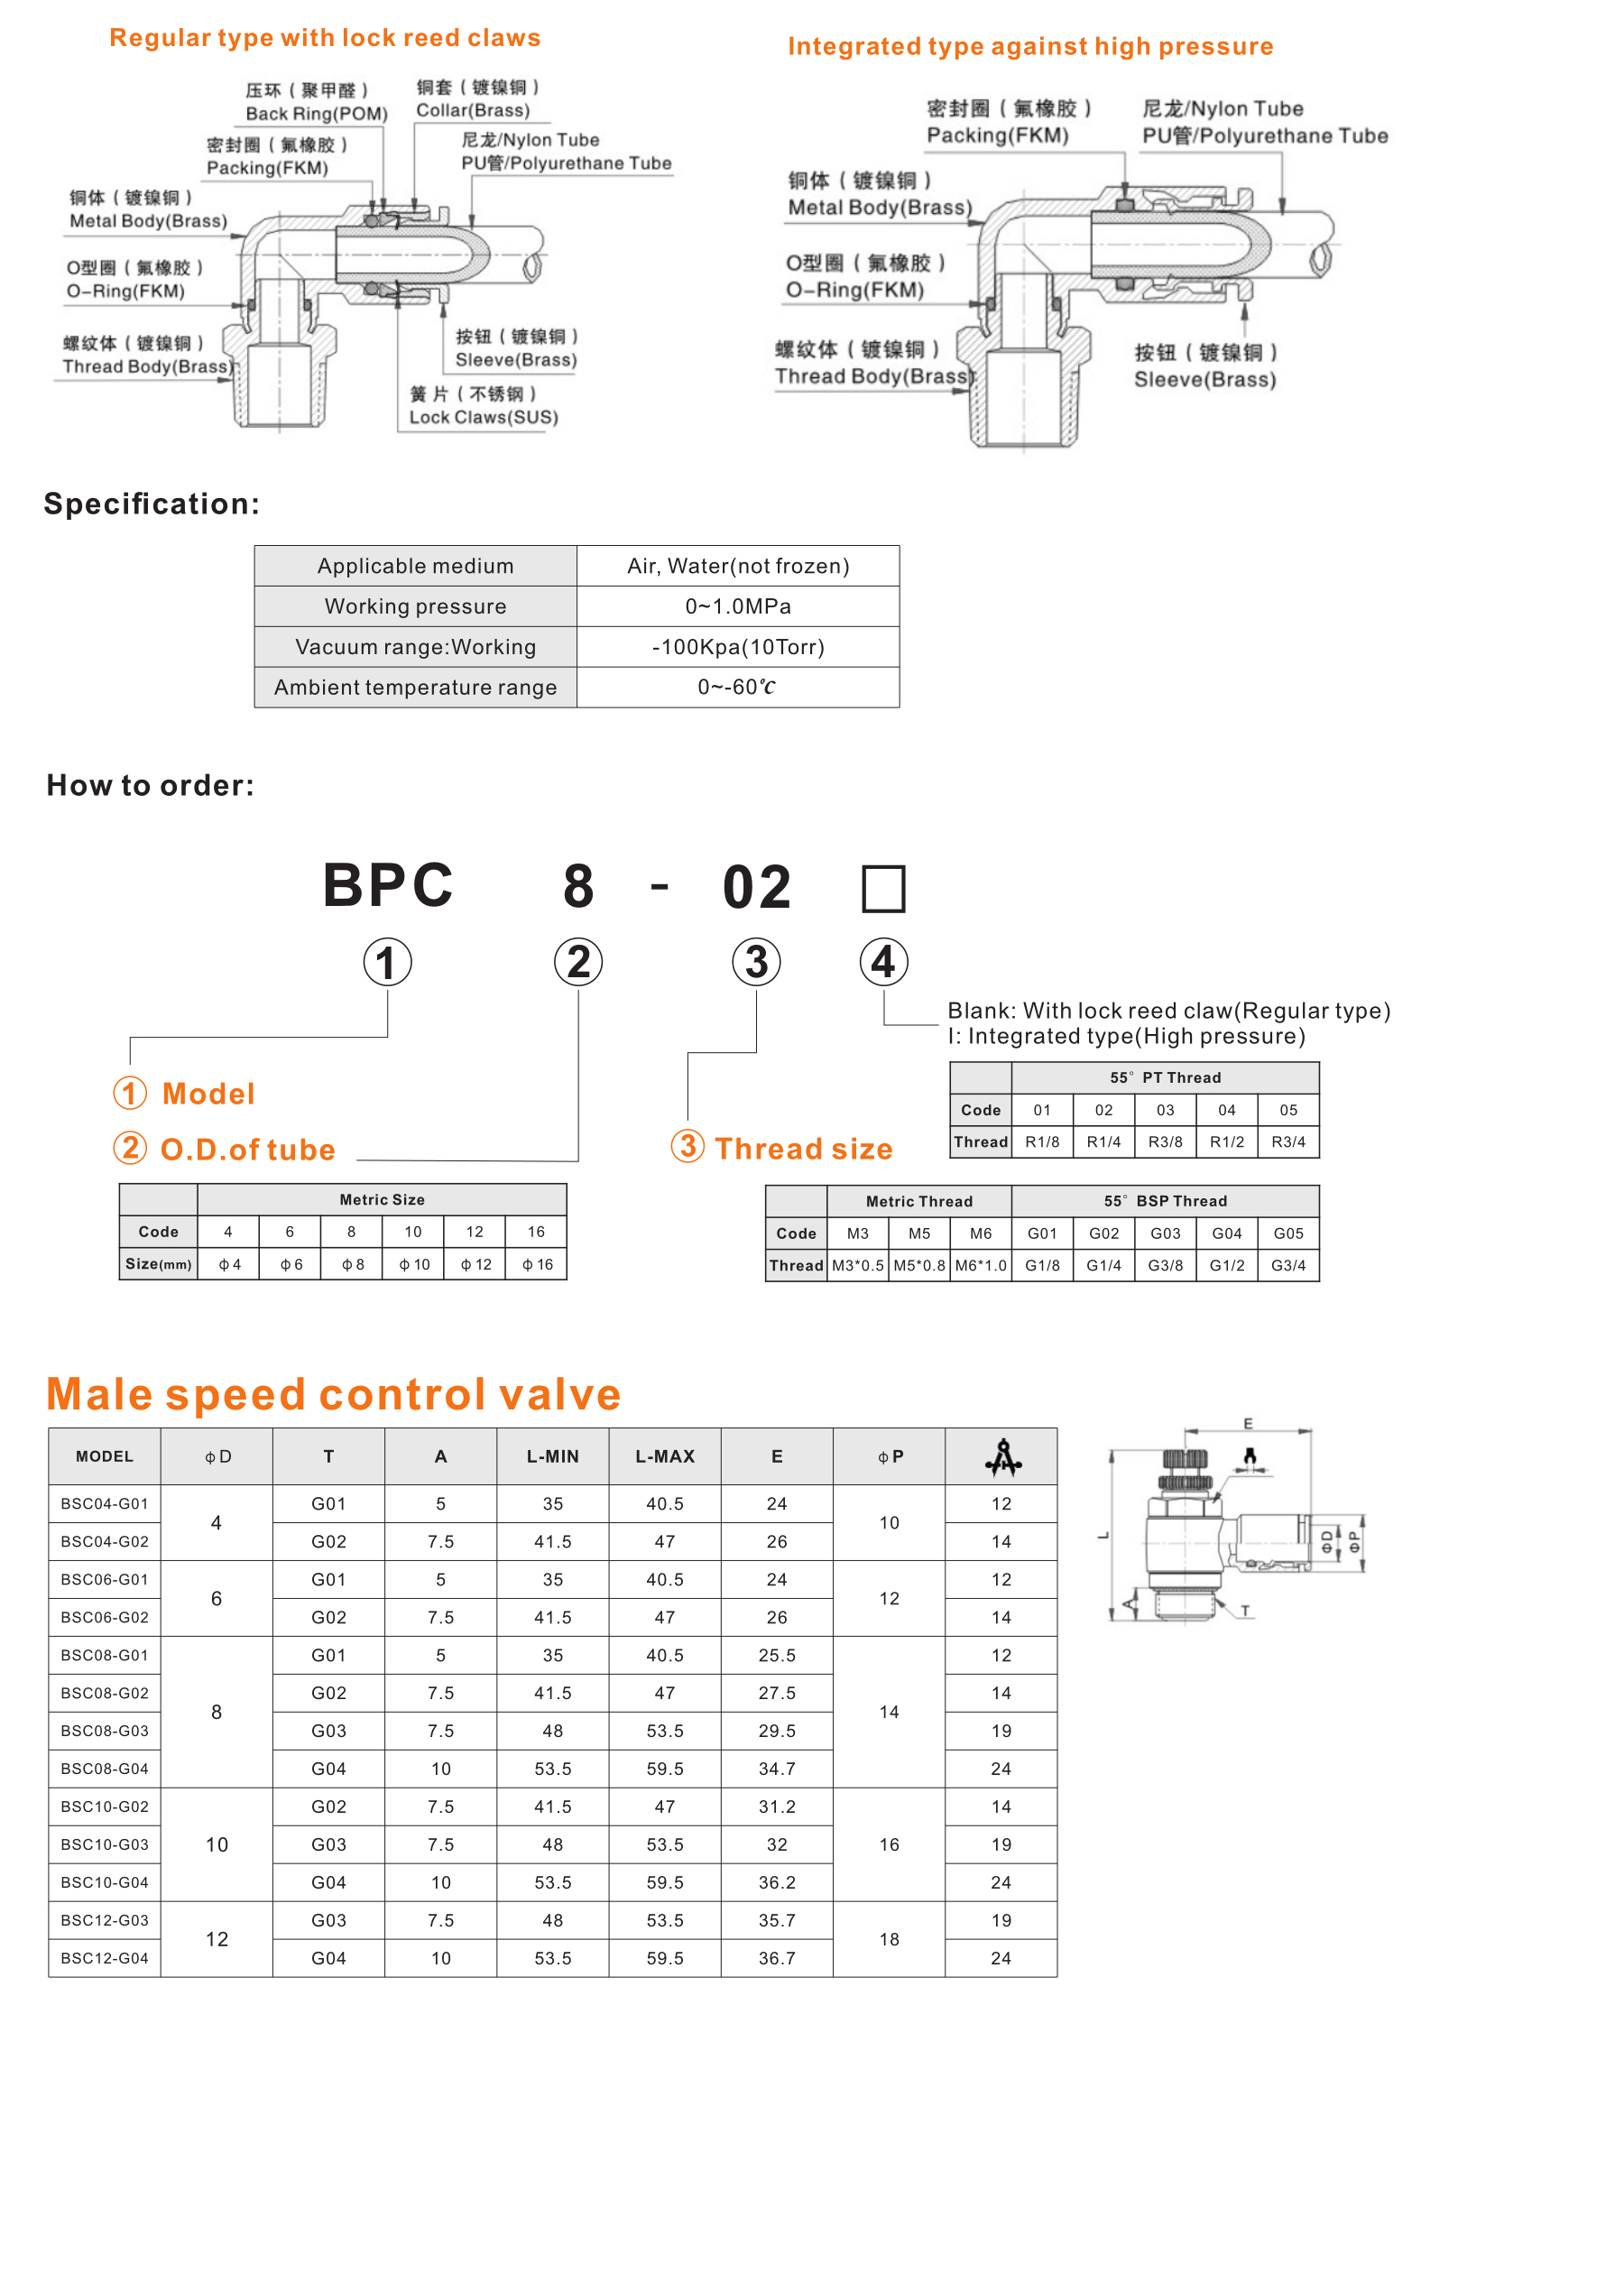 BSC-G Male speed control valve